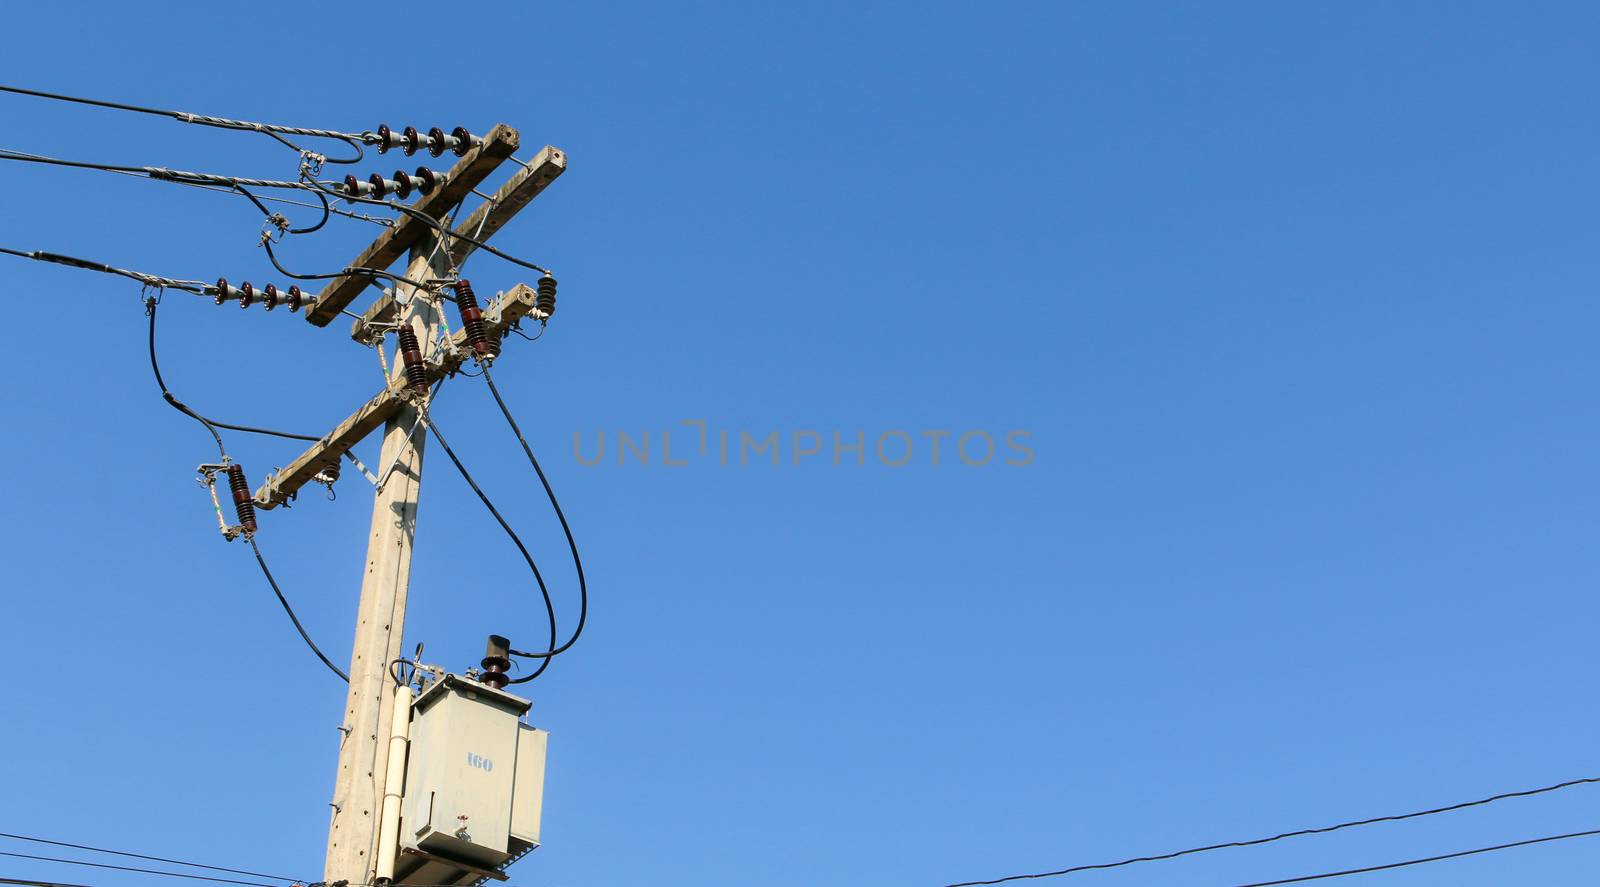 Transformer and power lines on electric pole